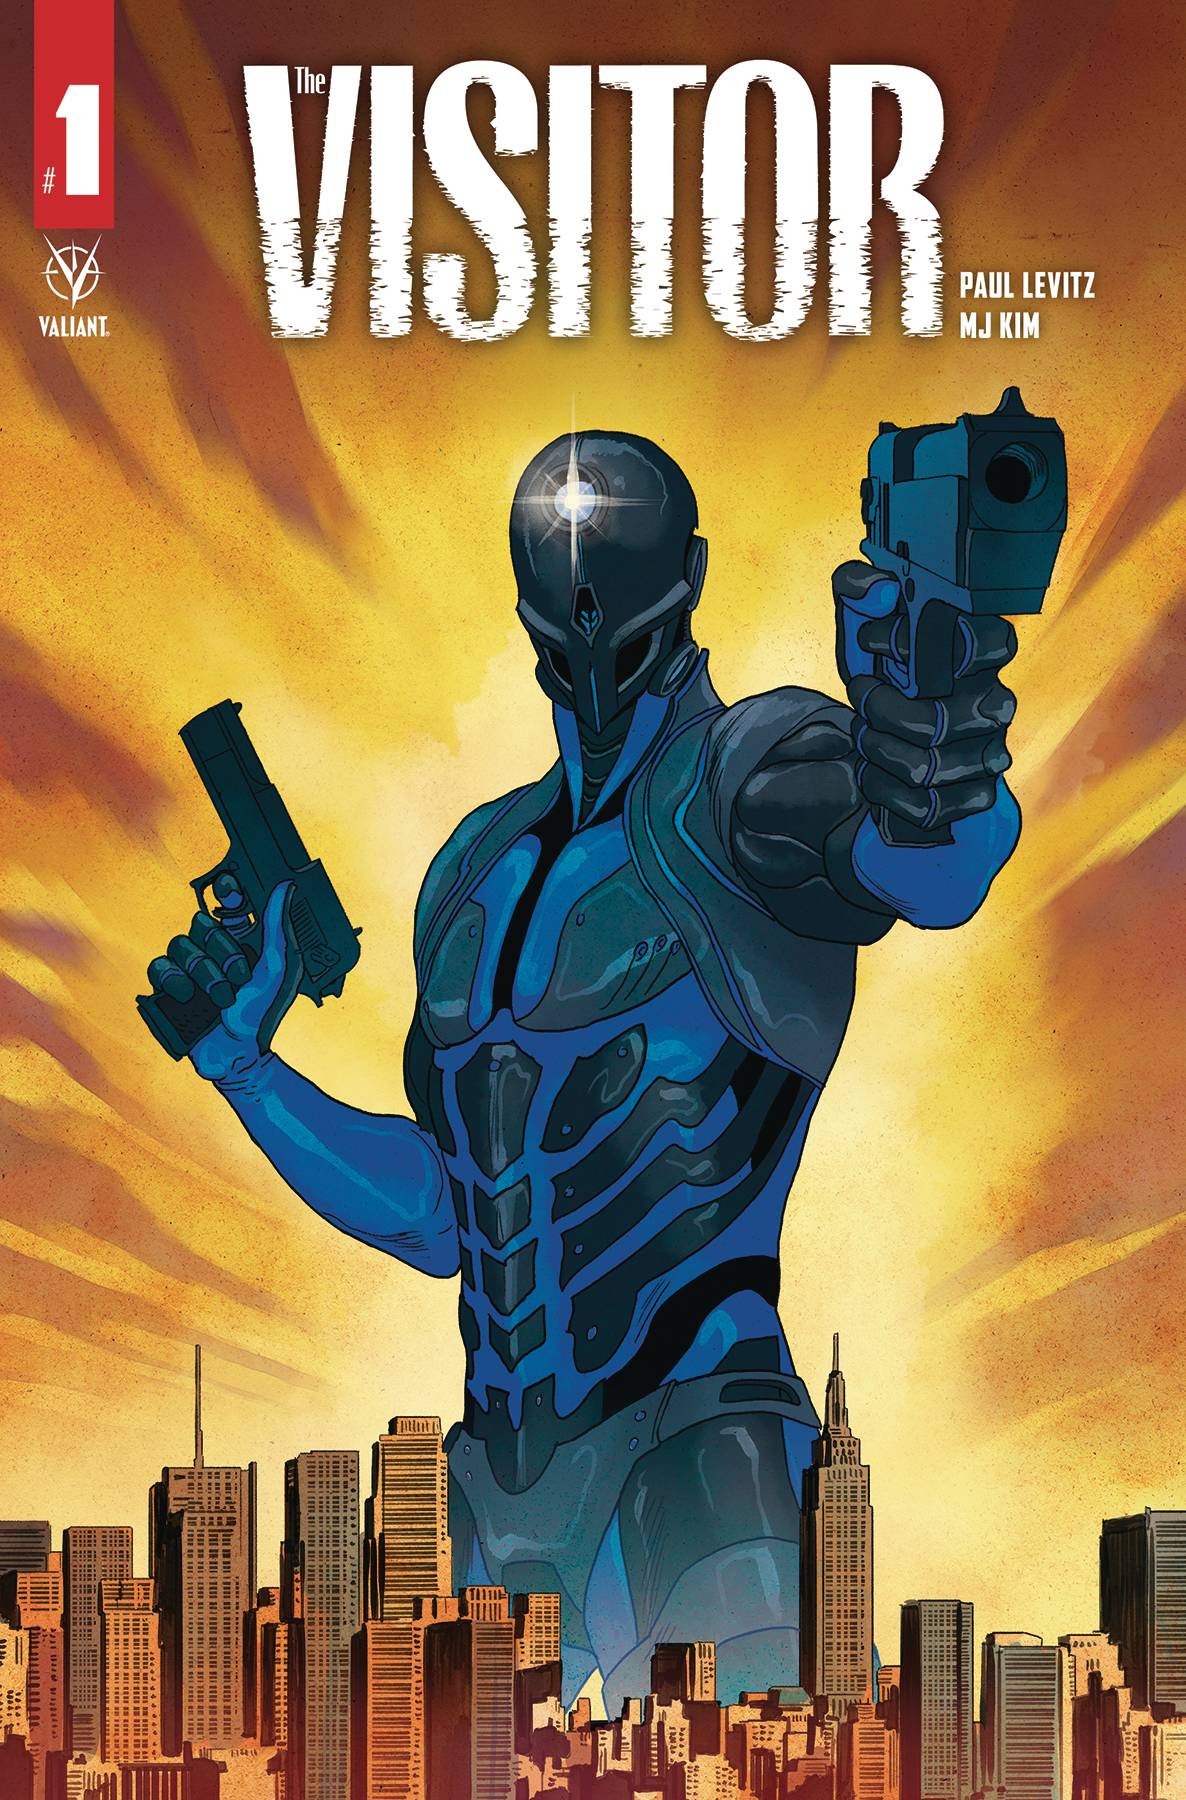 The Visitor #1 (2019)